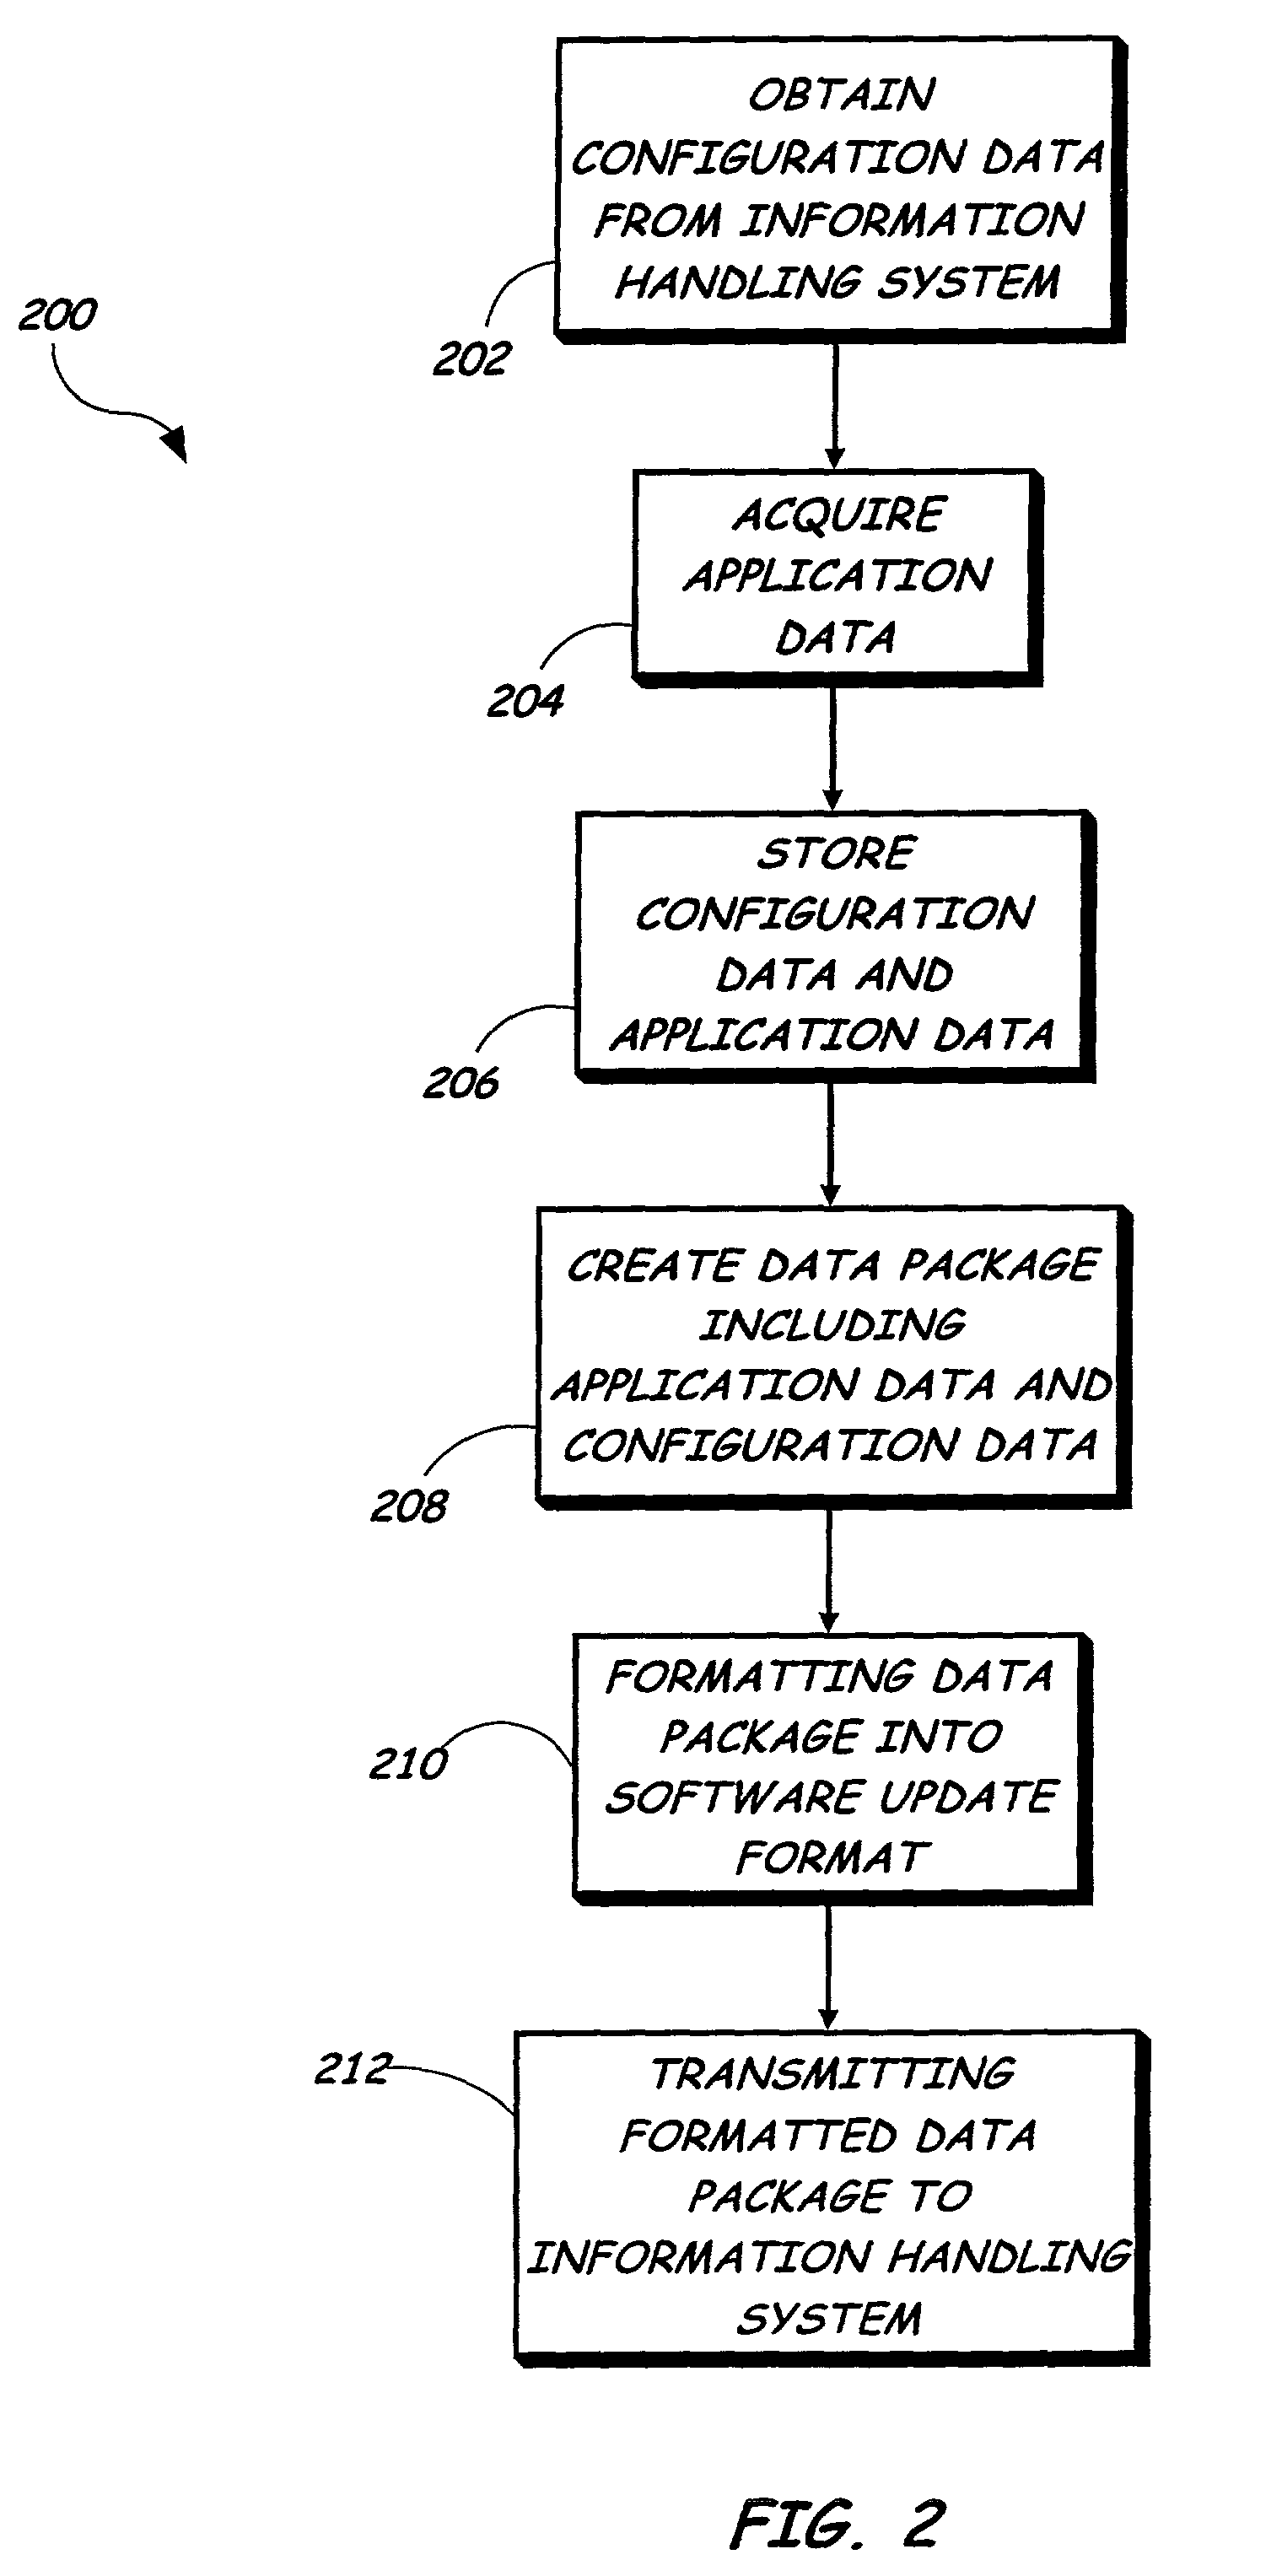 System for providing data backup and restore with updated version by creating data package based upon configuration data application data and user response to suggestion